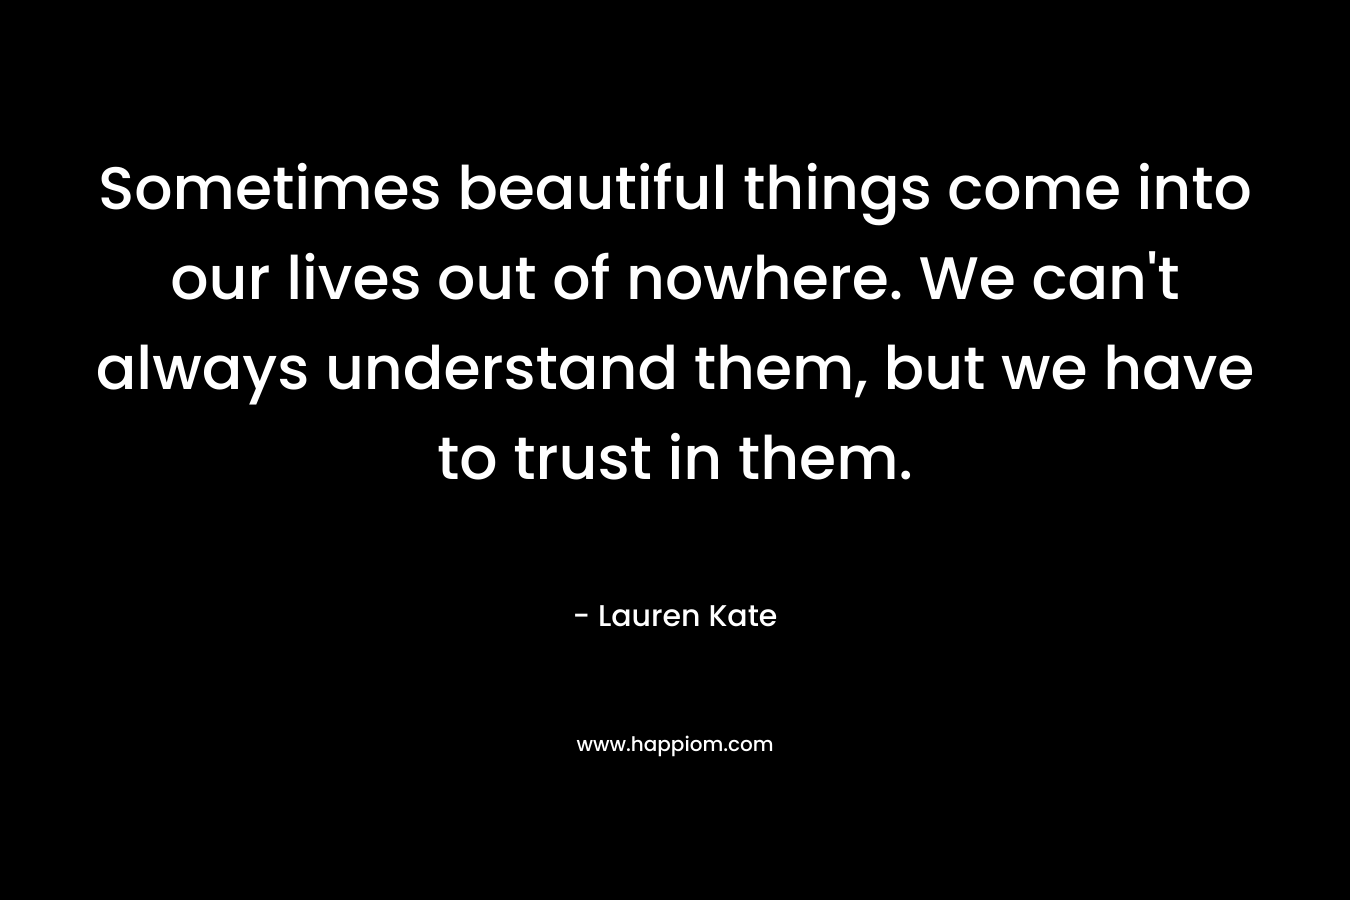 Sometimes beautiful things come into our lives out of nowhere. We can't always understand them, but we have to trust in them.